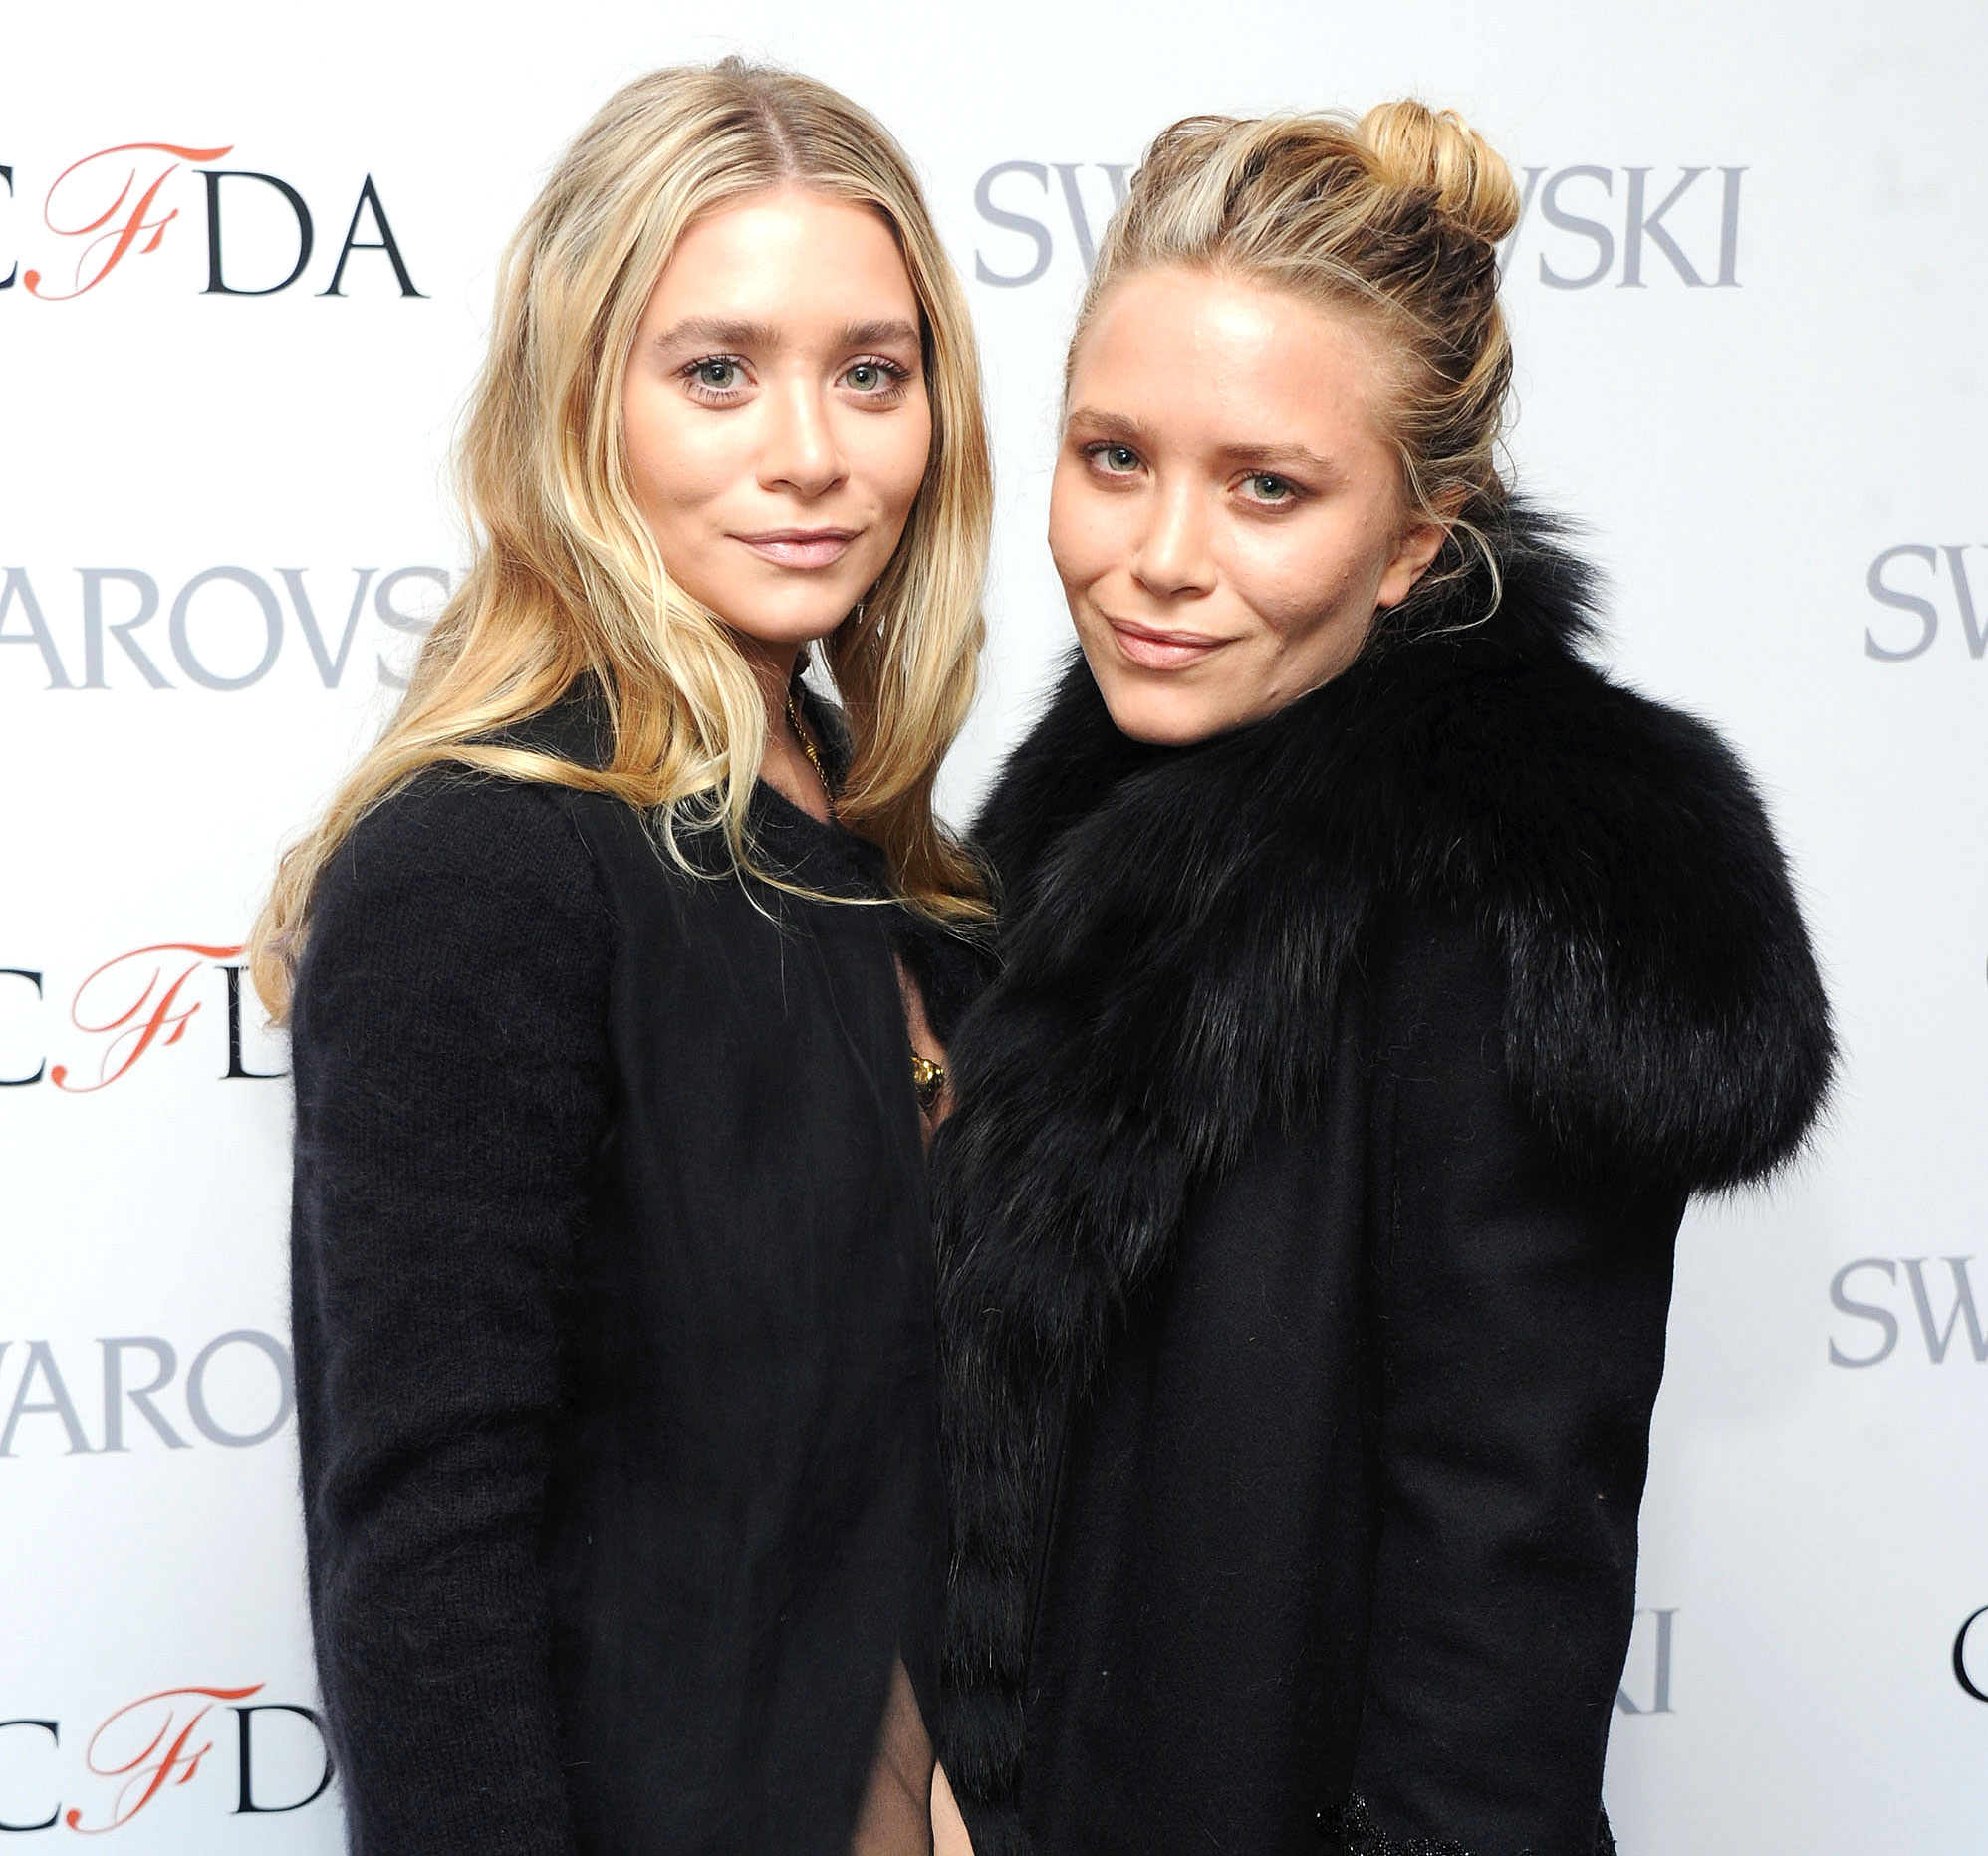 Mary-Kate Olsen keeps warm in an oversized black coat while